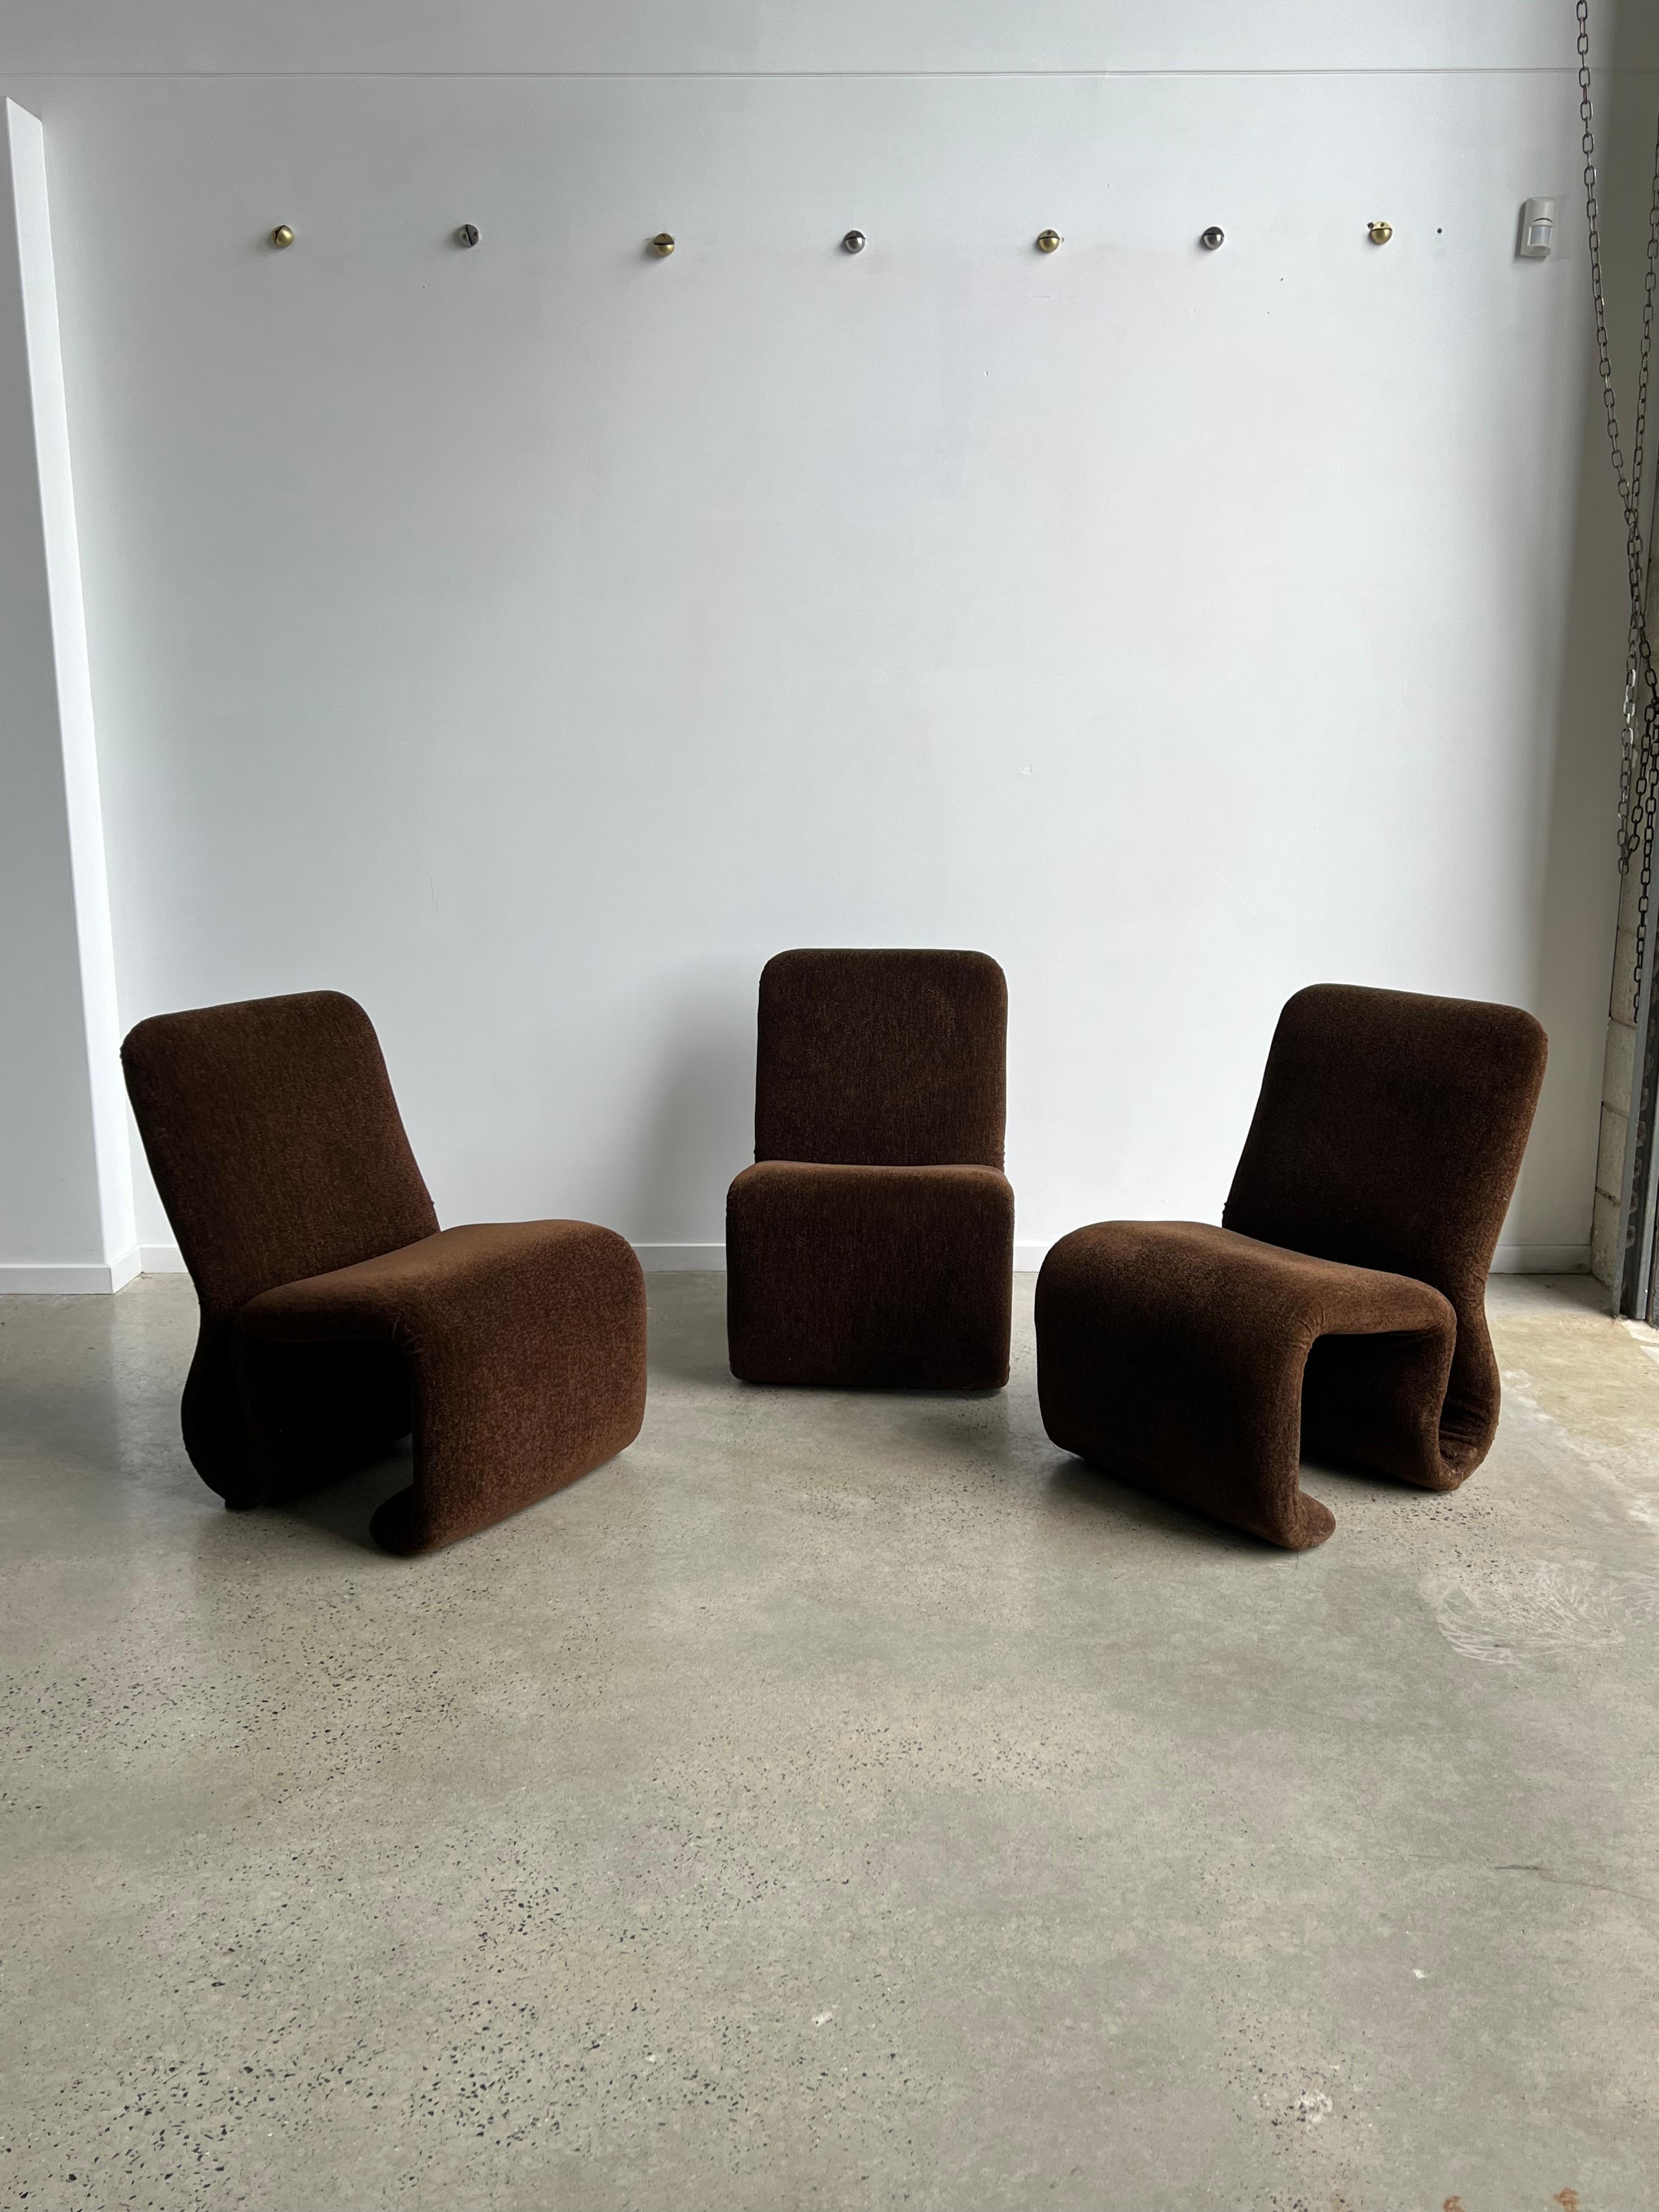 Set of three beautiful Vintage 'Etcetera' space age easy chair by Jan Ekselius, 1970s in brown velvet 
good condition.
Designed by Jan Ekselius in 1970, the Etcetera Chair is often chosen to represent the distinctive design of the 70s. With its